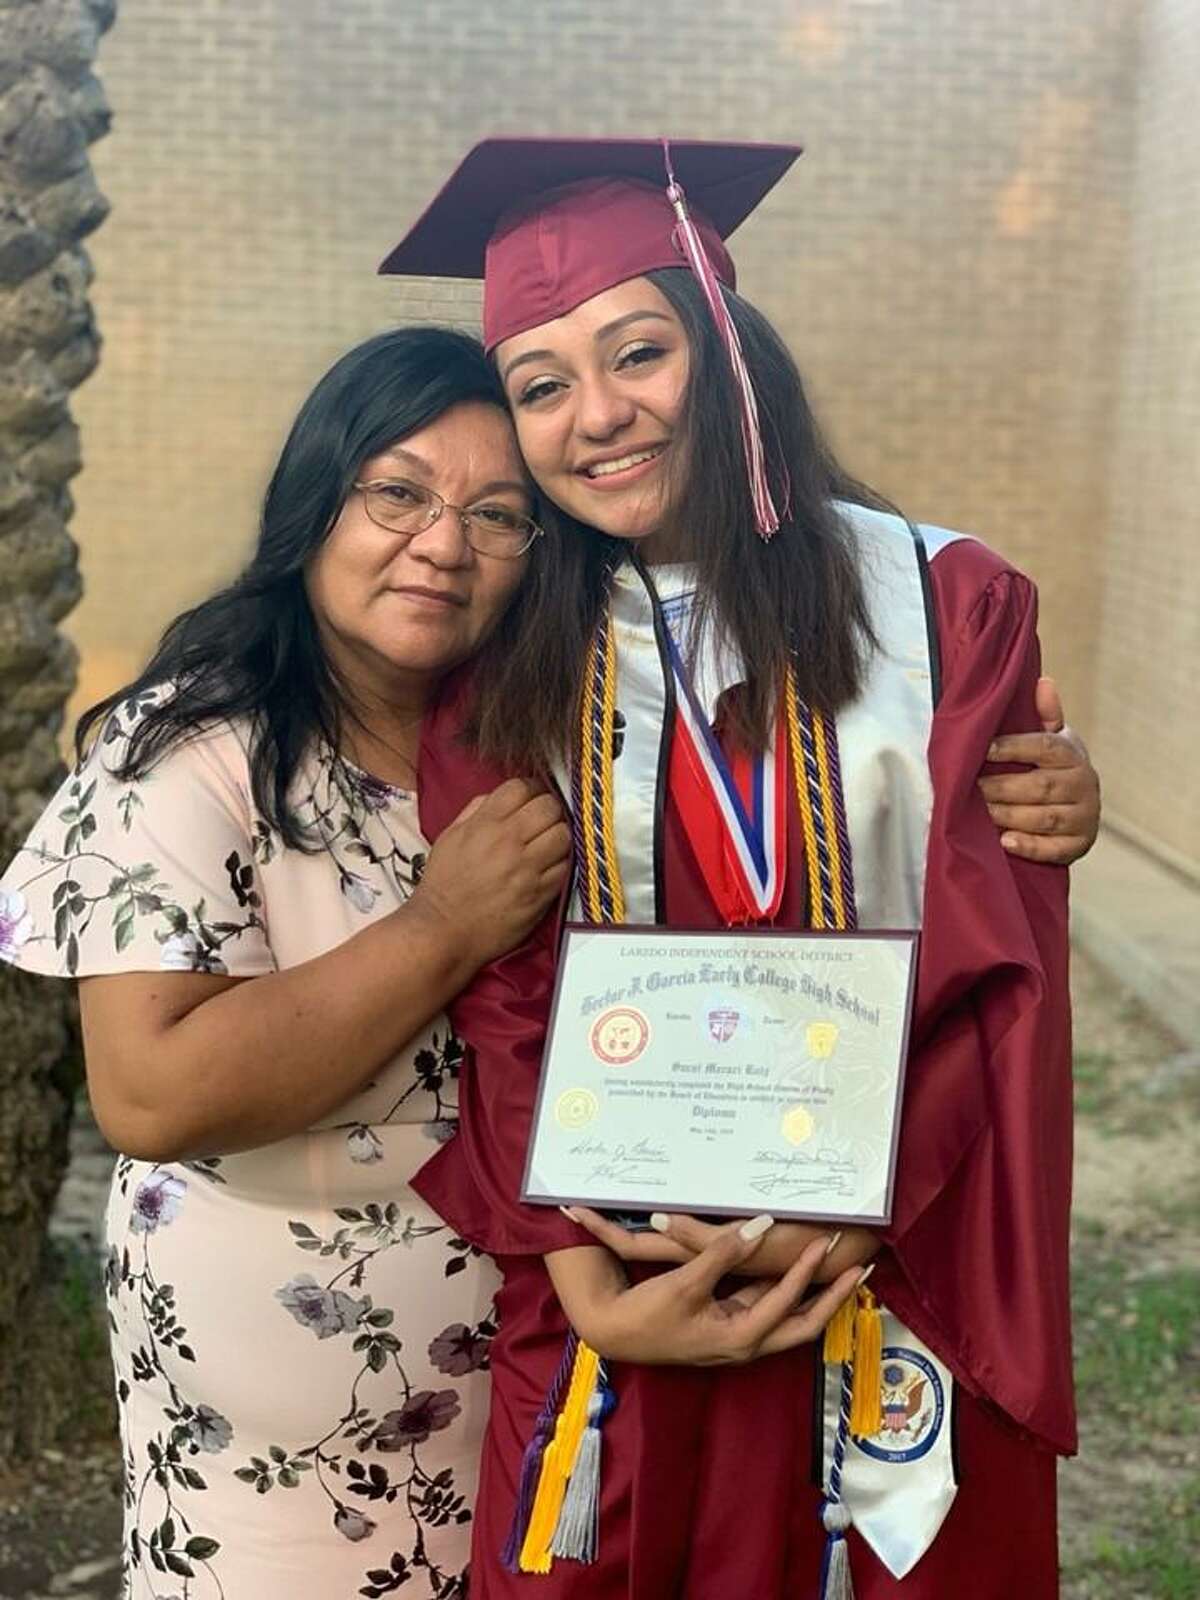 Saraí Ruiz is shown with her diploma alongside her mother after her graduation from Hector J. Garcia Early College High School.